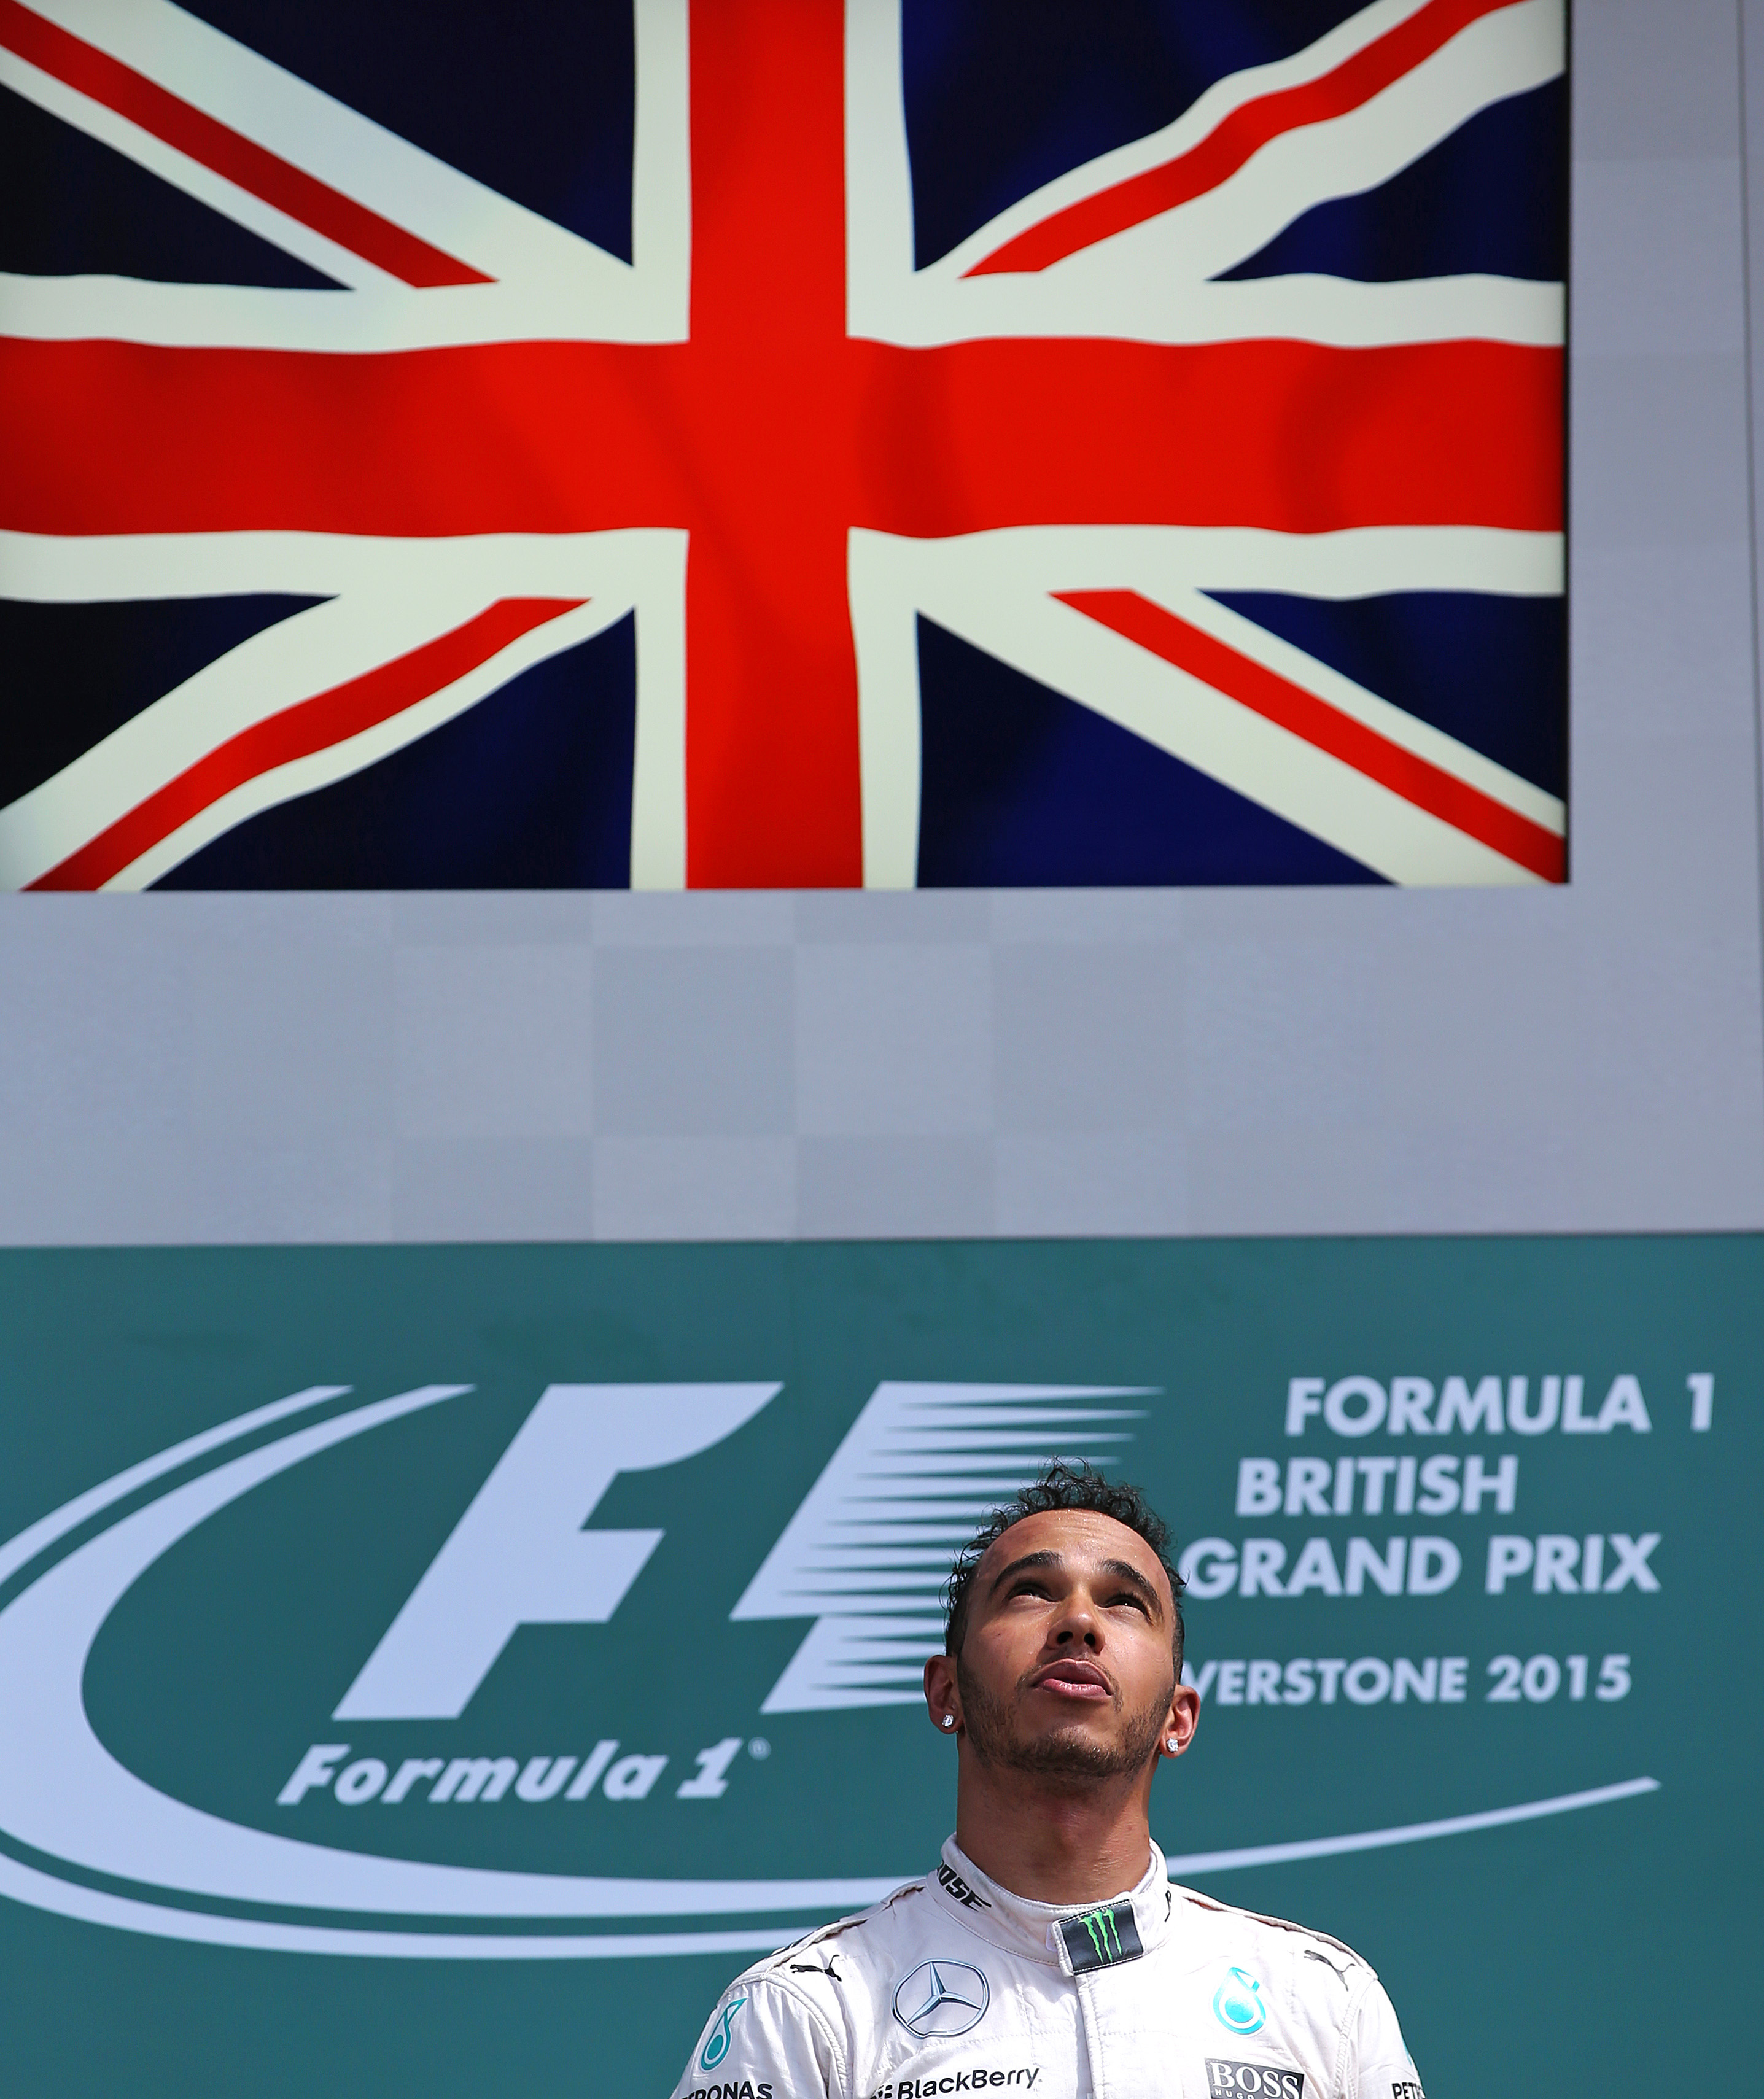 Lewis Hamilton might not have watched the Wimbledon final, but he sits comfortably at the top of the drivers' standings. Photo: Reuters